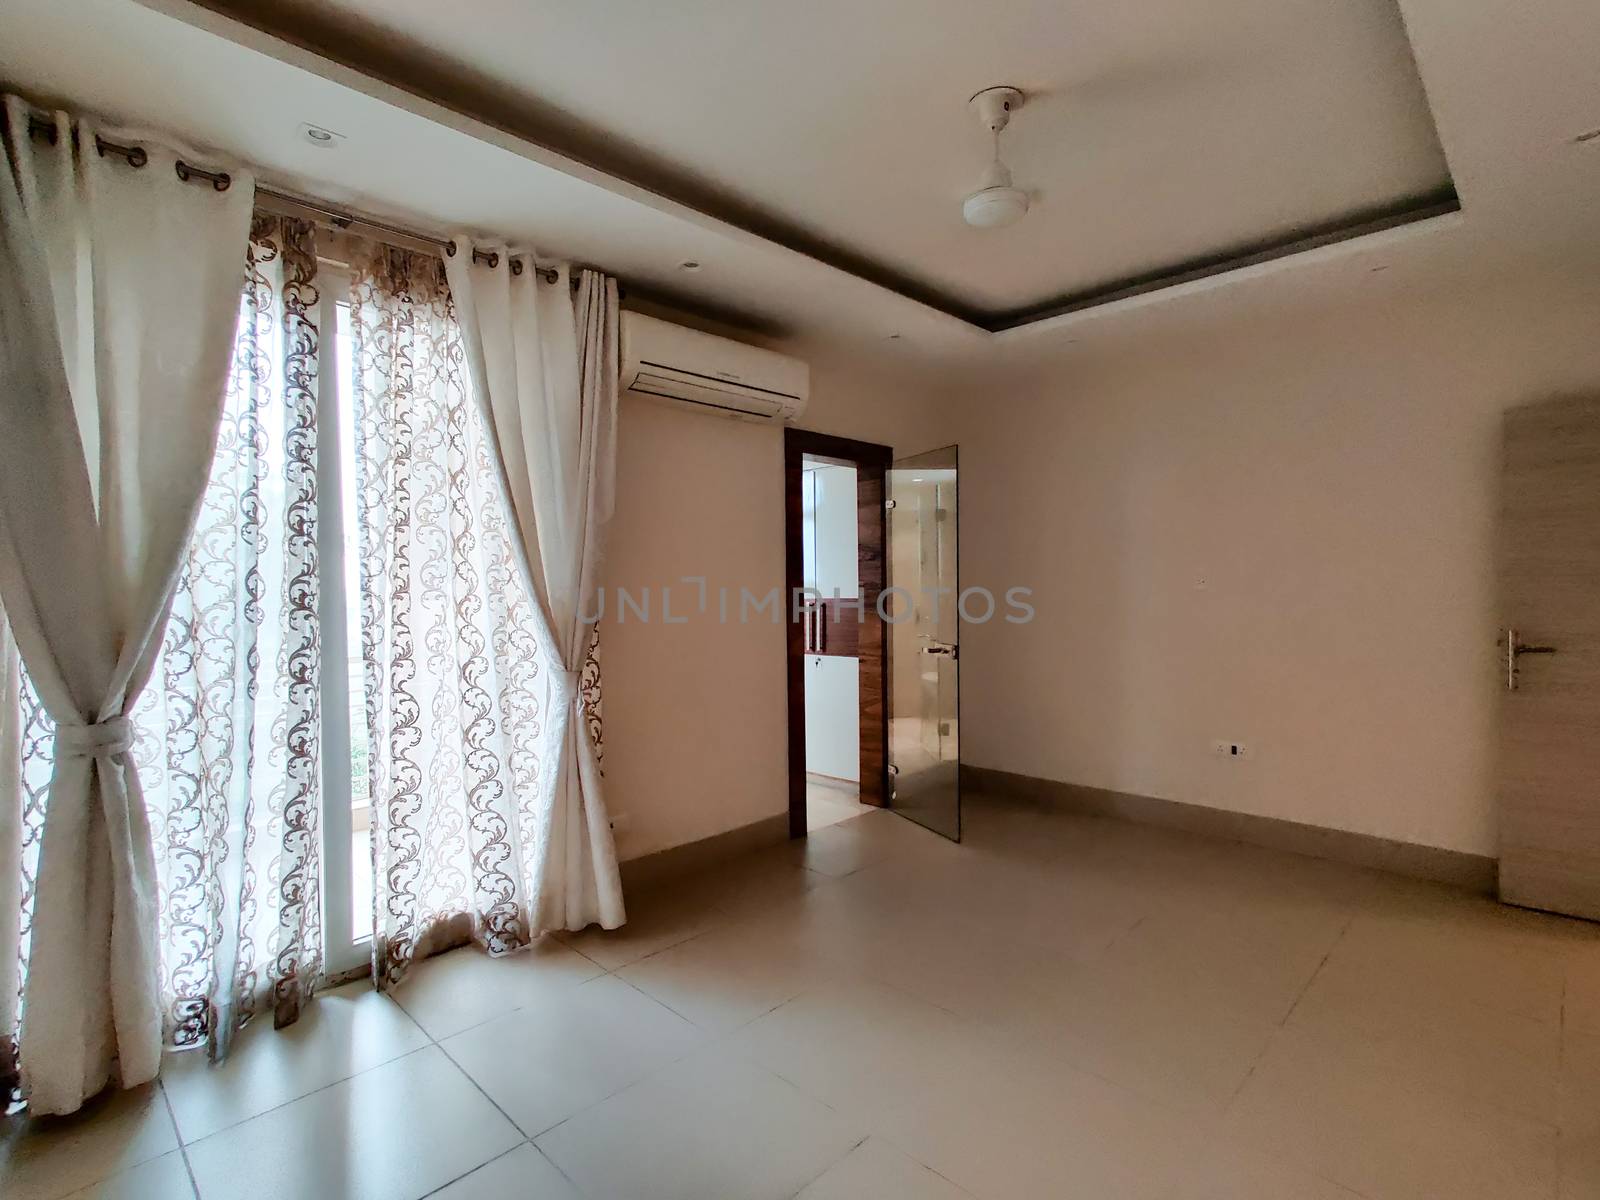 Wide angle shot of a ready to move in apartment with lace curtains and good natural light. Shot at a modern expensive beautifully maintained flat or apartment in Delhi, Gurgaon, Noida for premium individuals. Shows the real estate of India